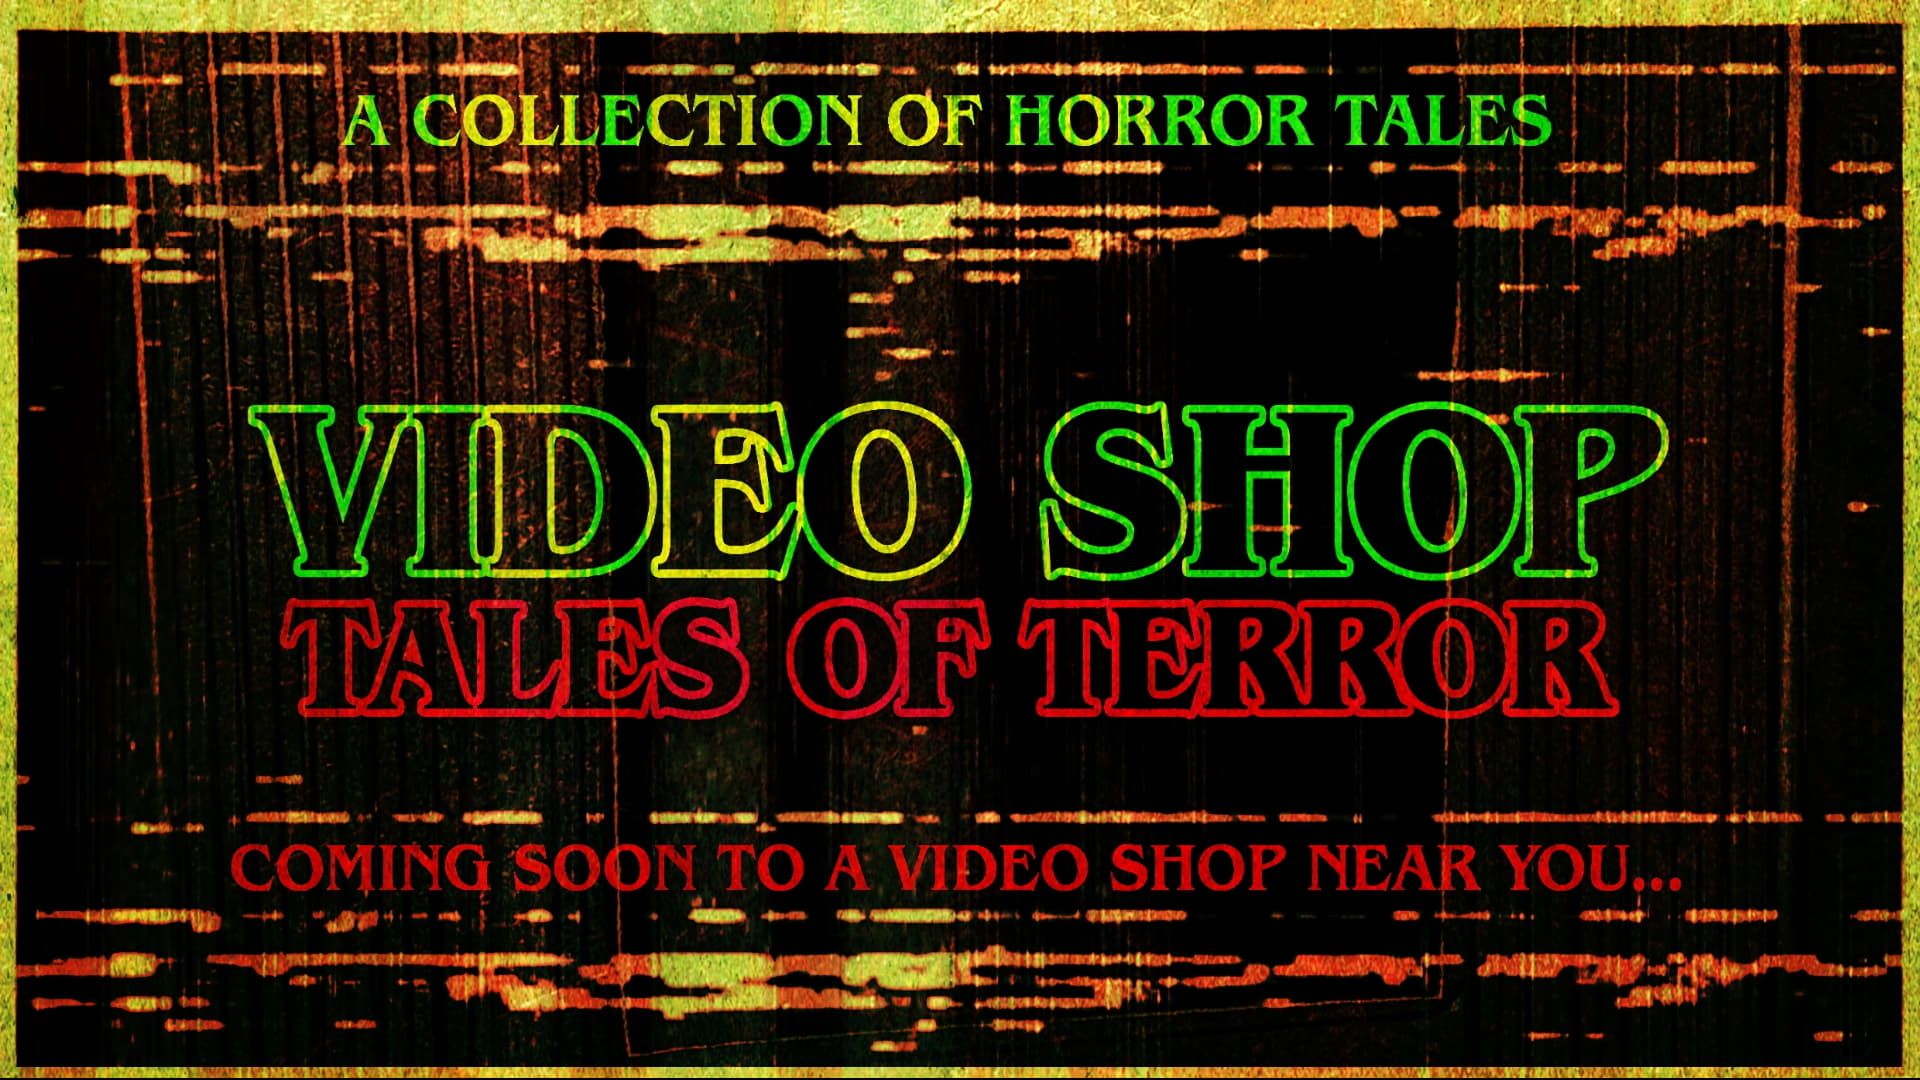 Video Shop Tales of Terror background